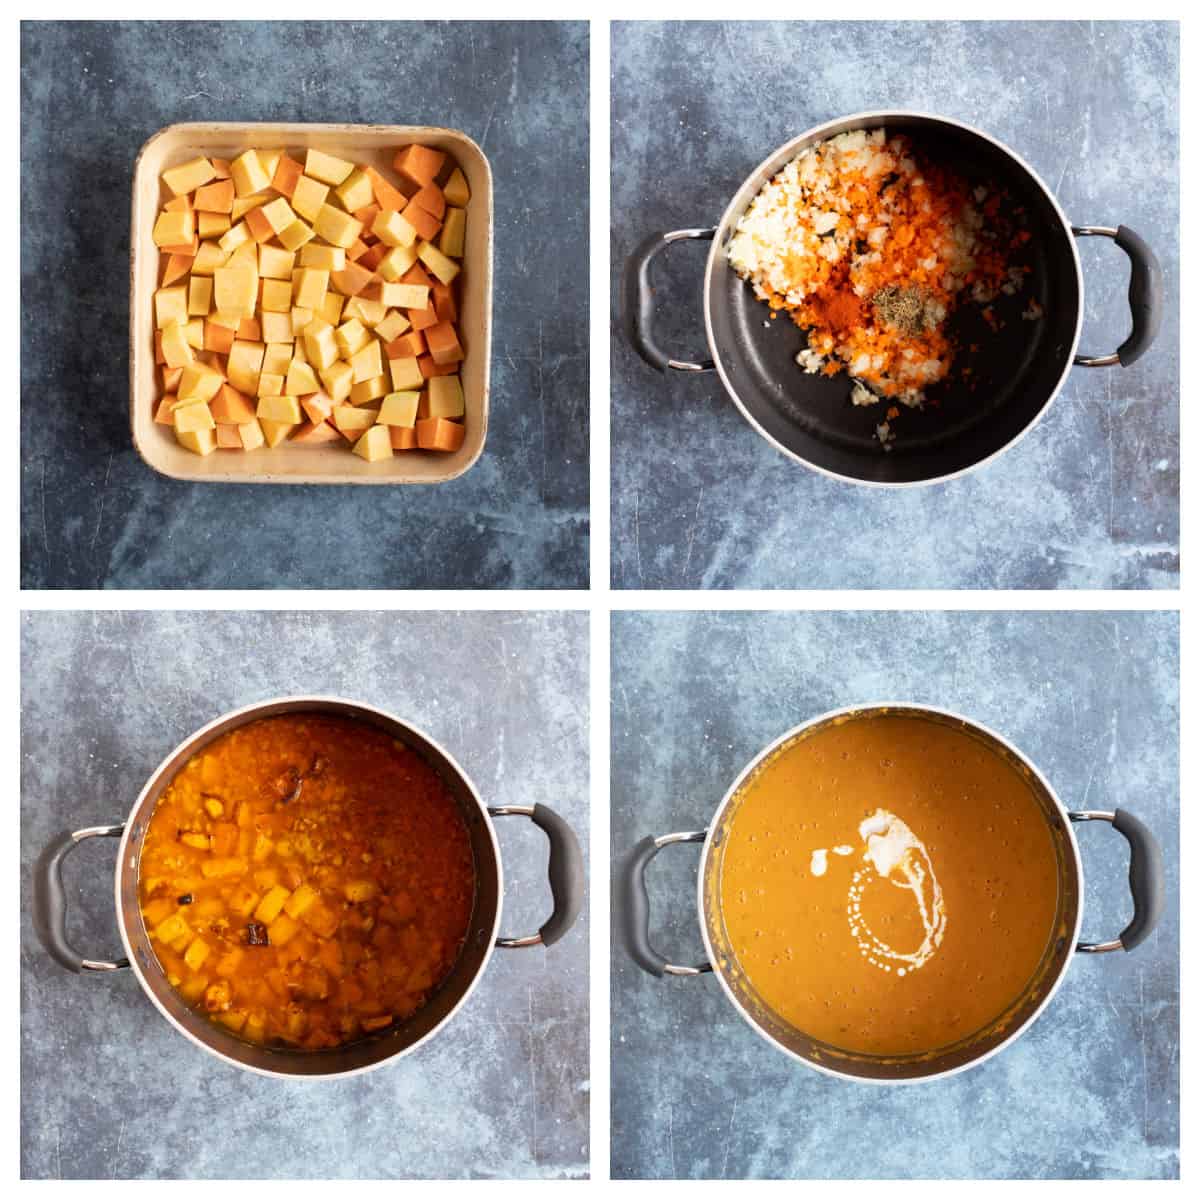 Step by step photo instructions for making swede soup.